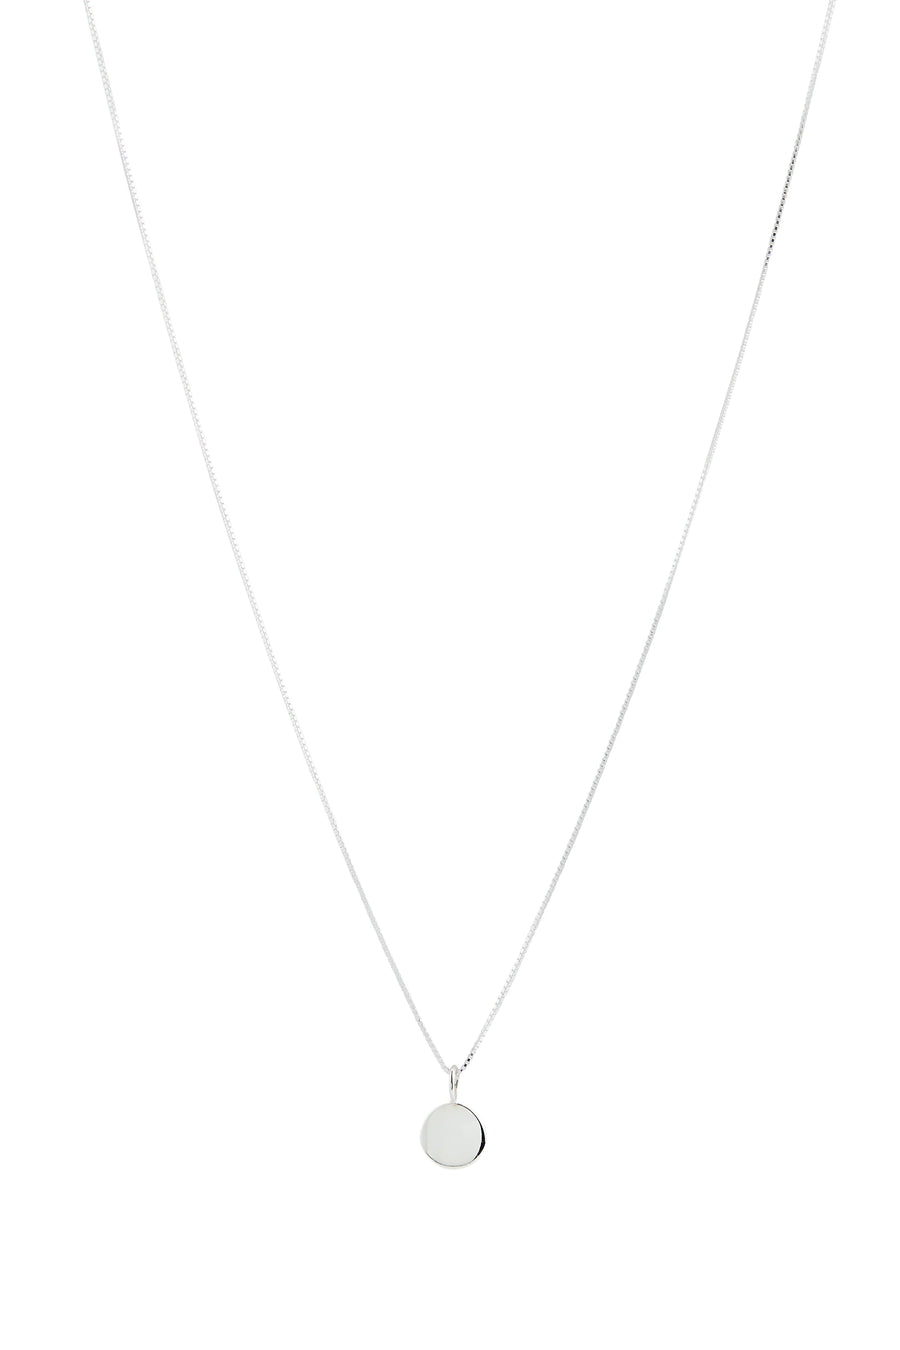 LISBETH JEWELRY - LINA NECKLACE - SILVER